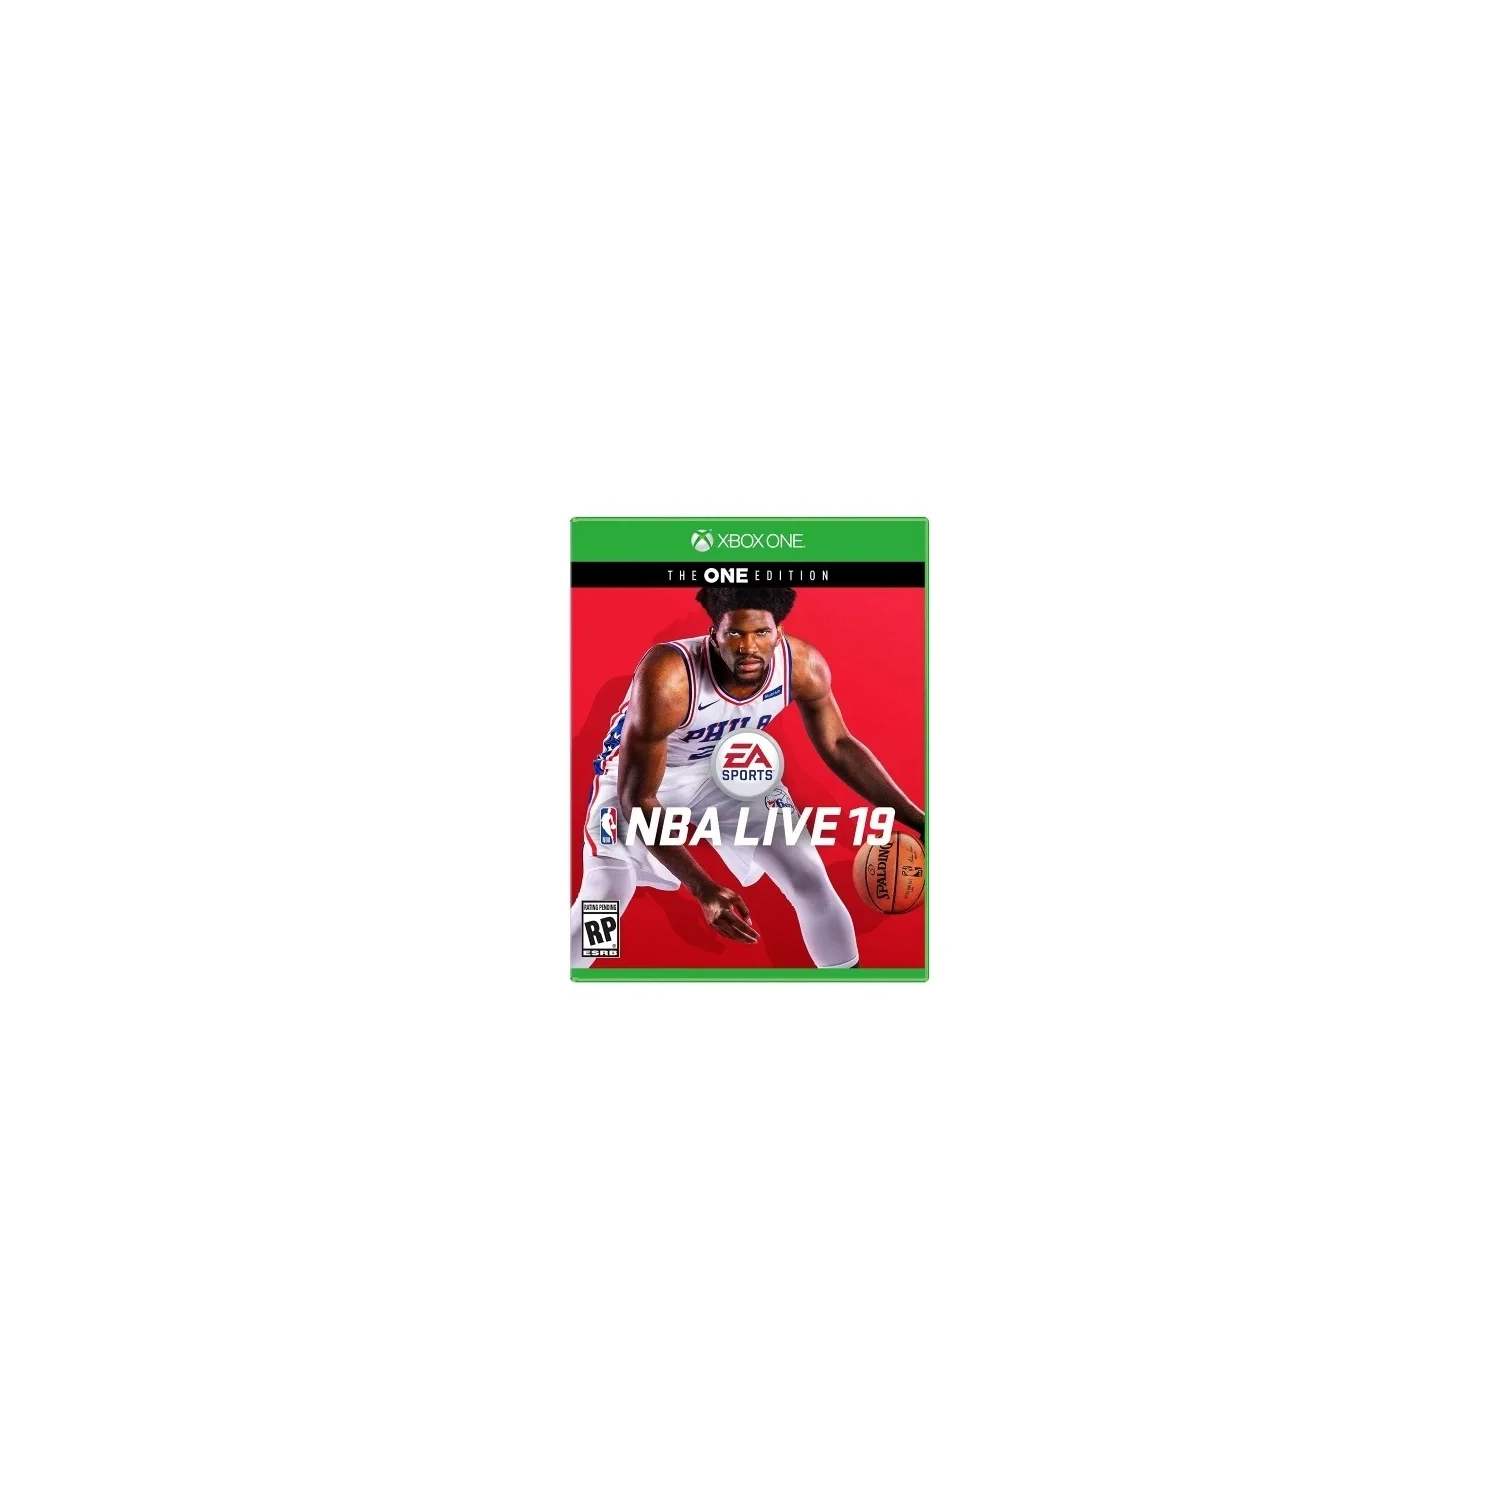 NBA Live 19 for Xbox One [VIDEOGAMES]